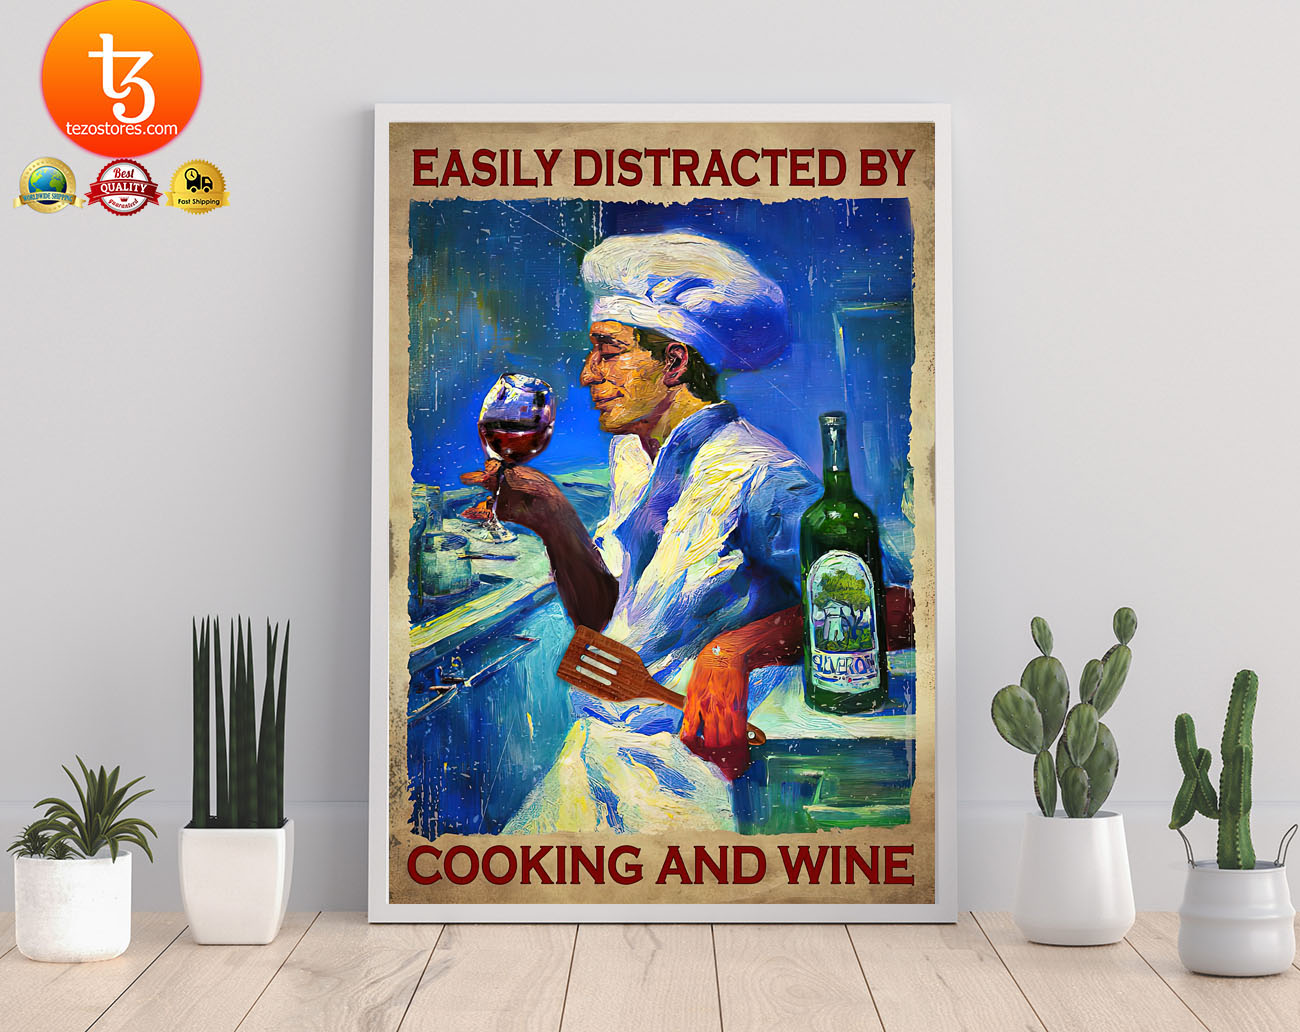 Easily distracted by cooking and wine poster2